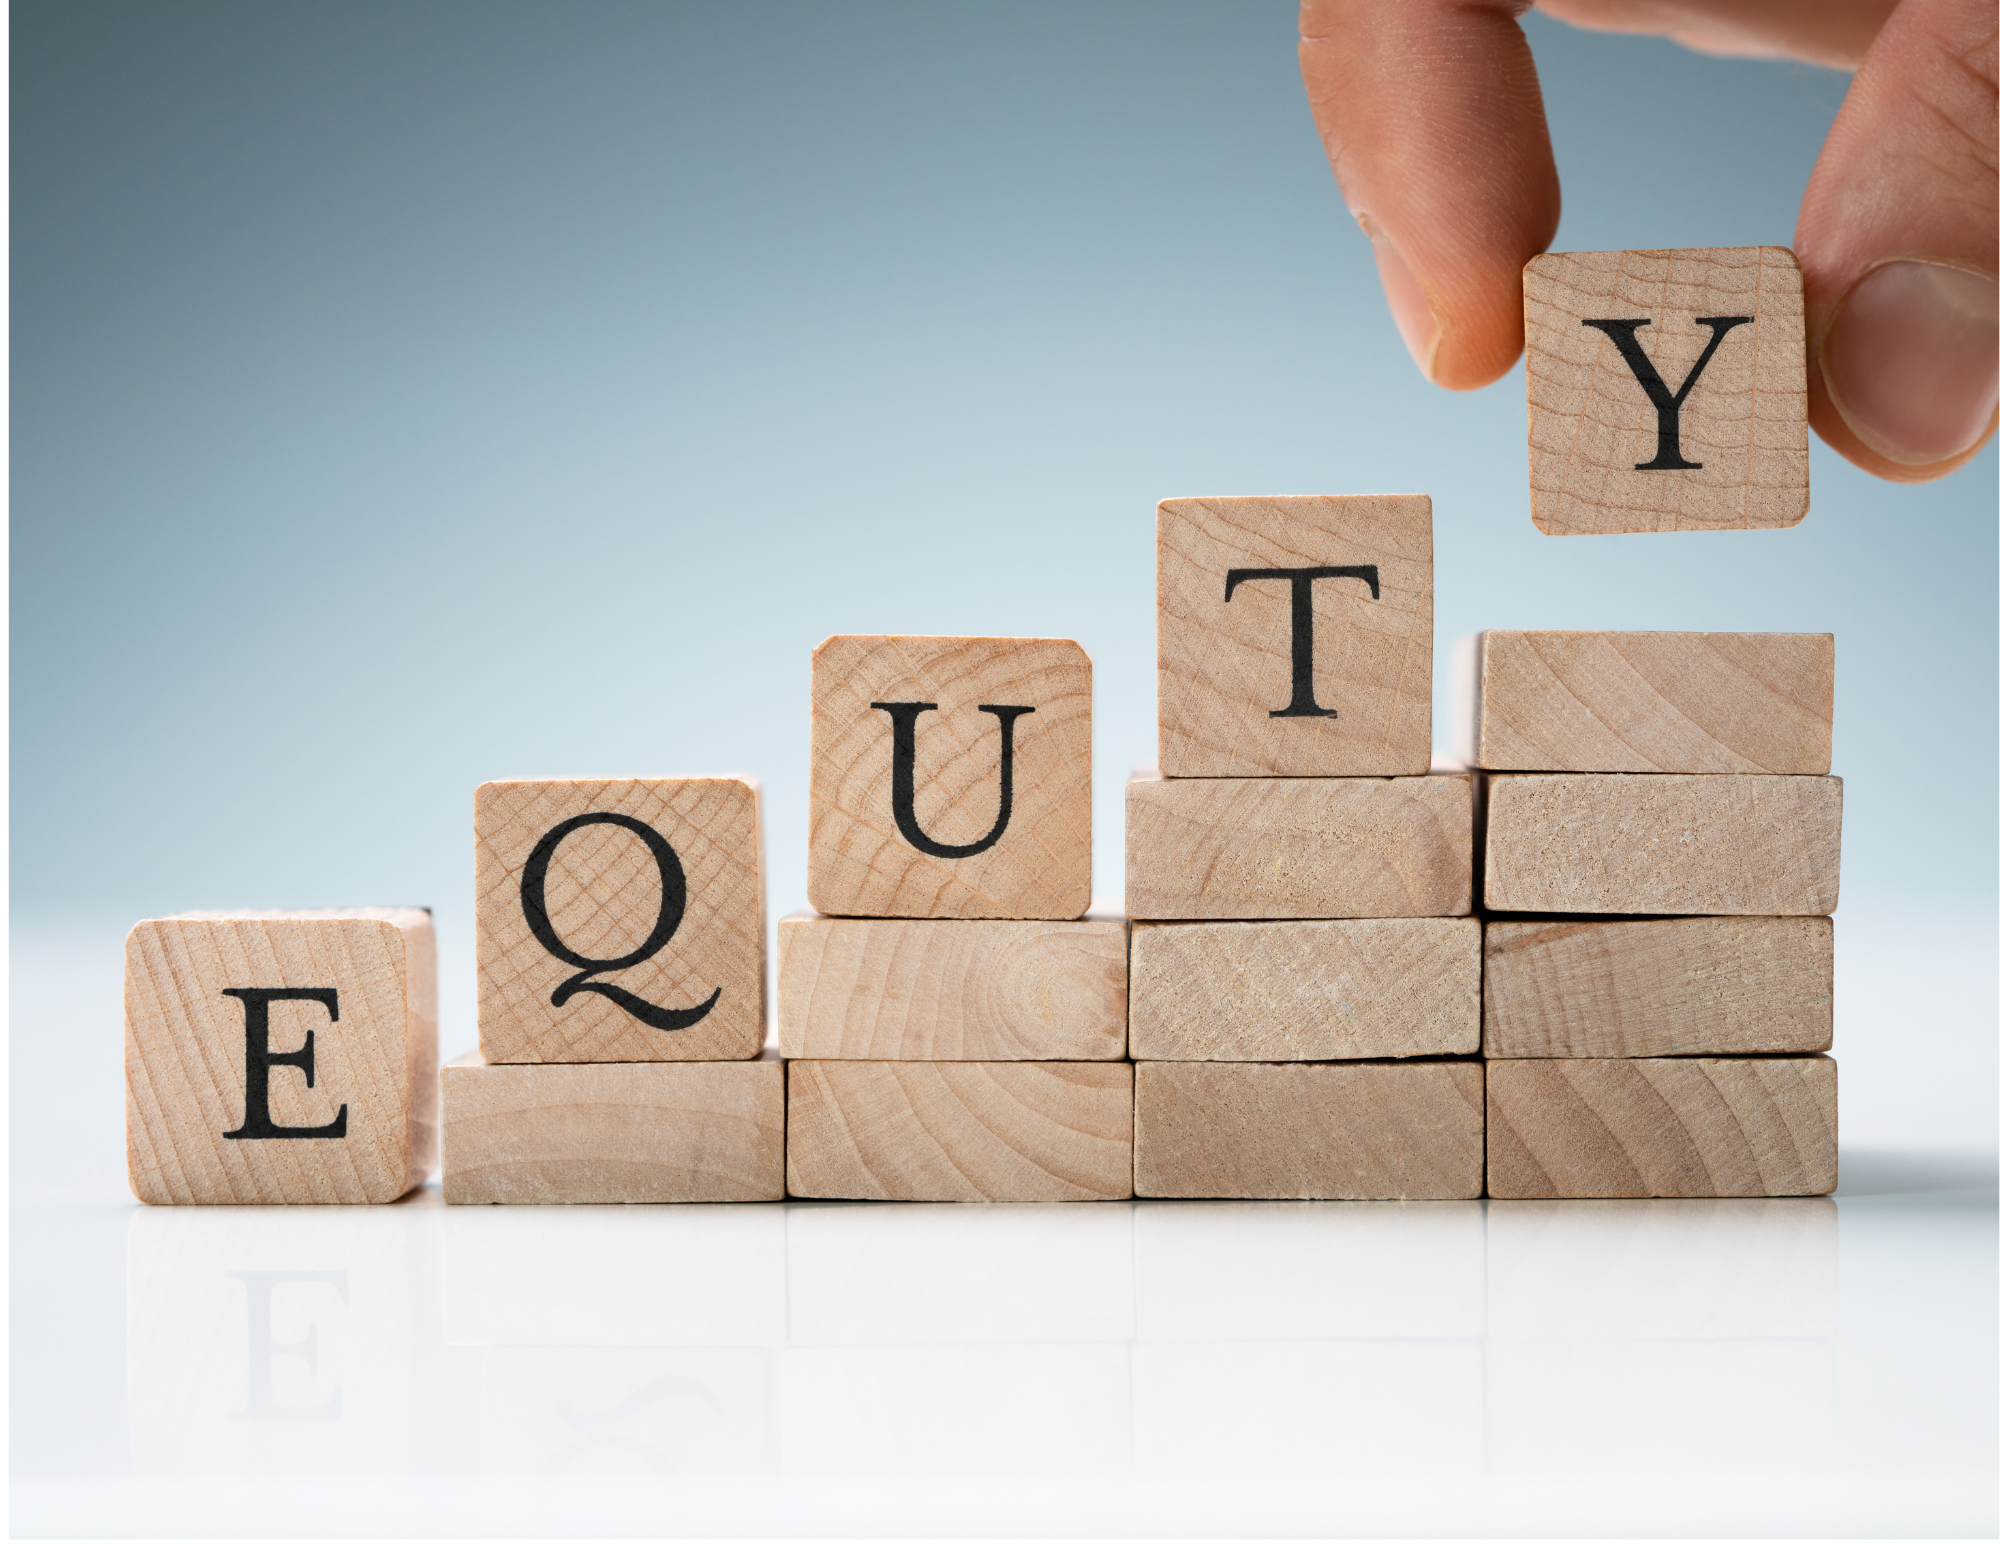 equity written out with blocks